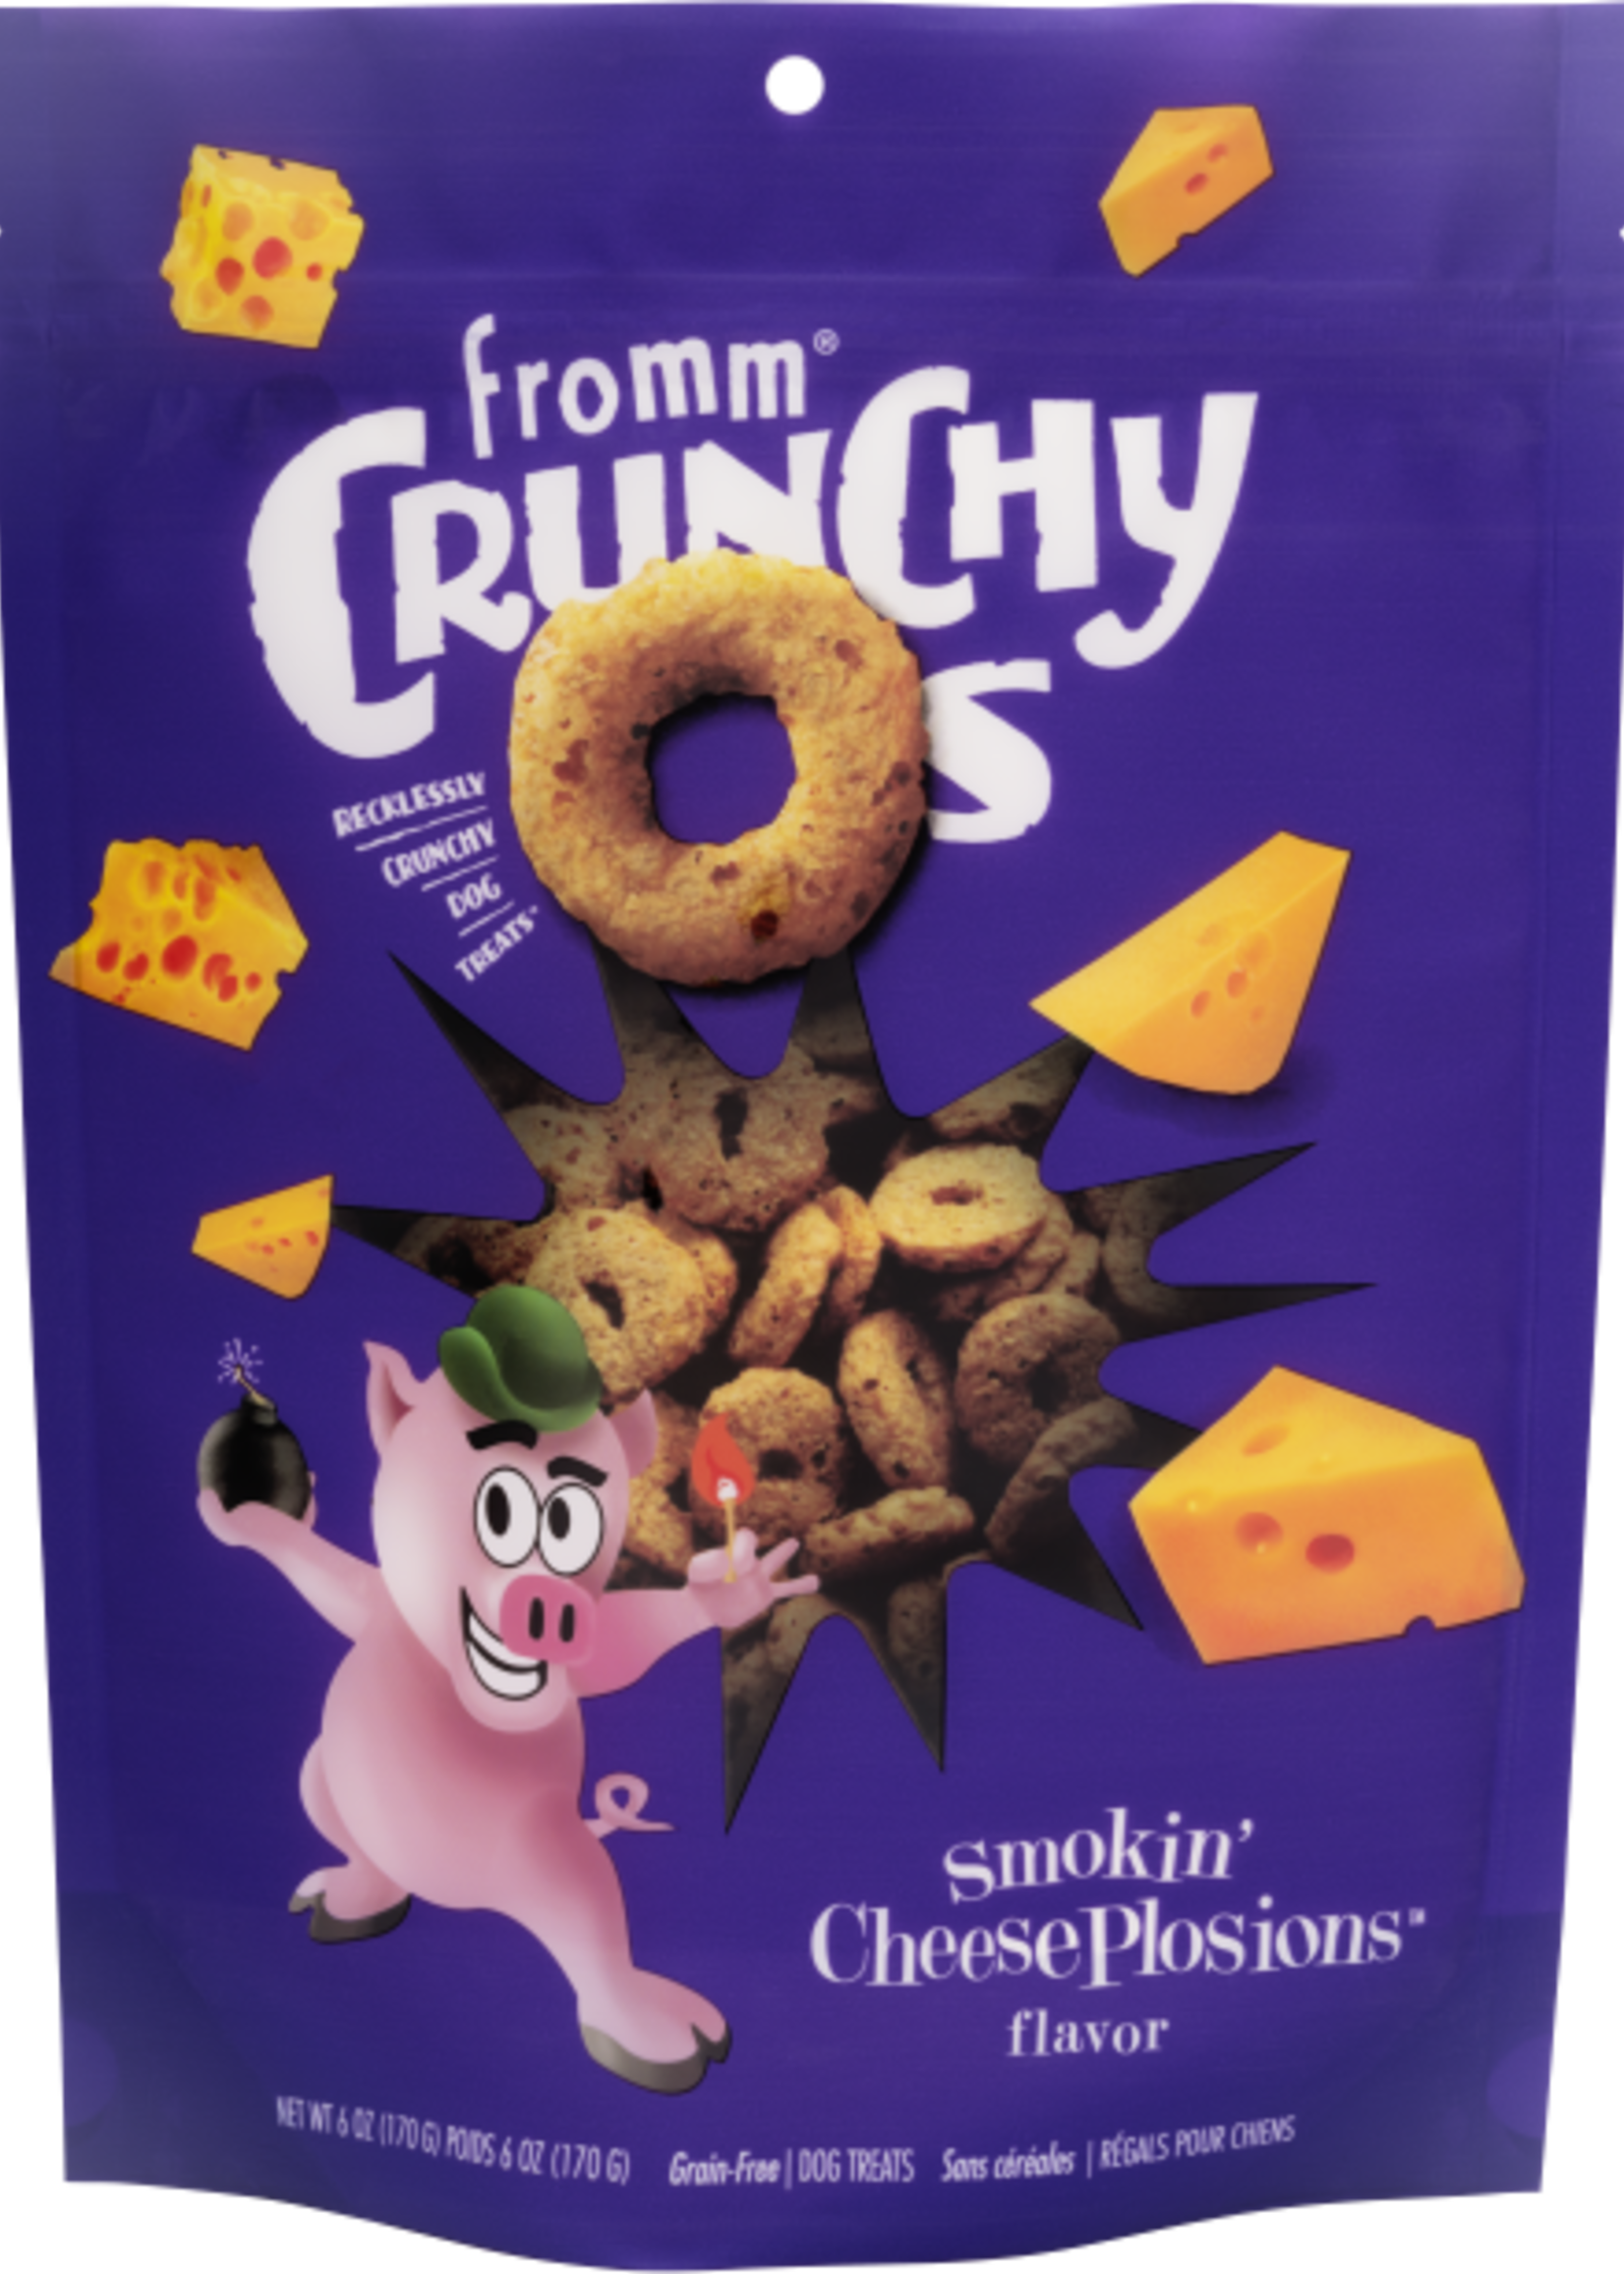 Fromm® Fromm Crunchy Os Smokin' CheesePlosions® 6oz